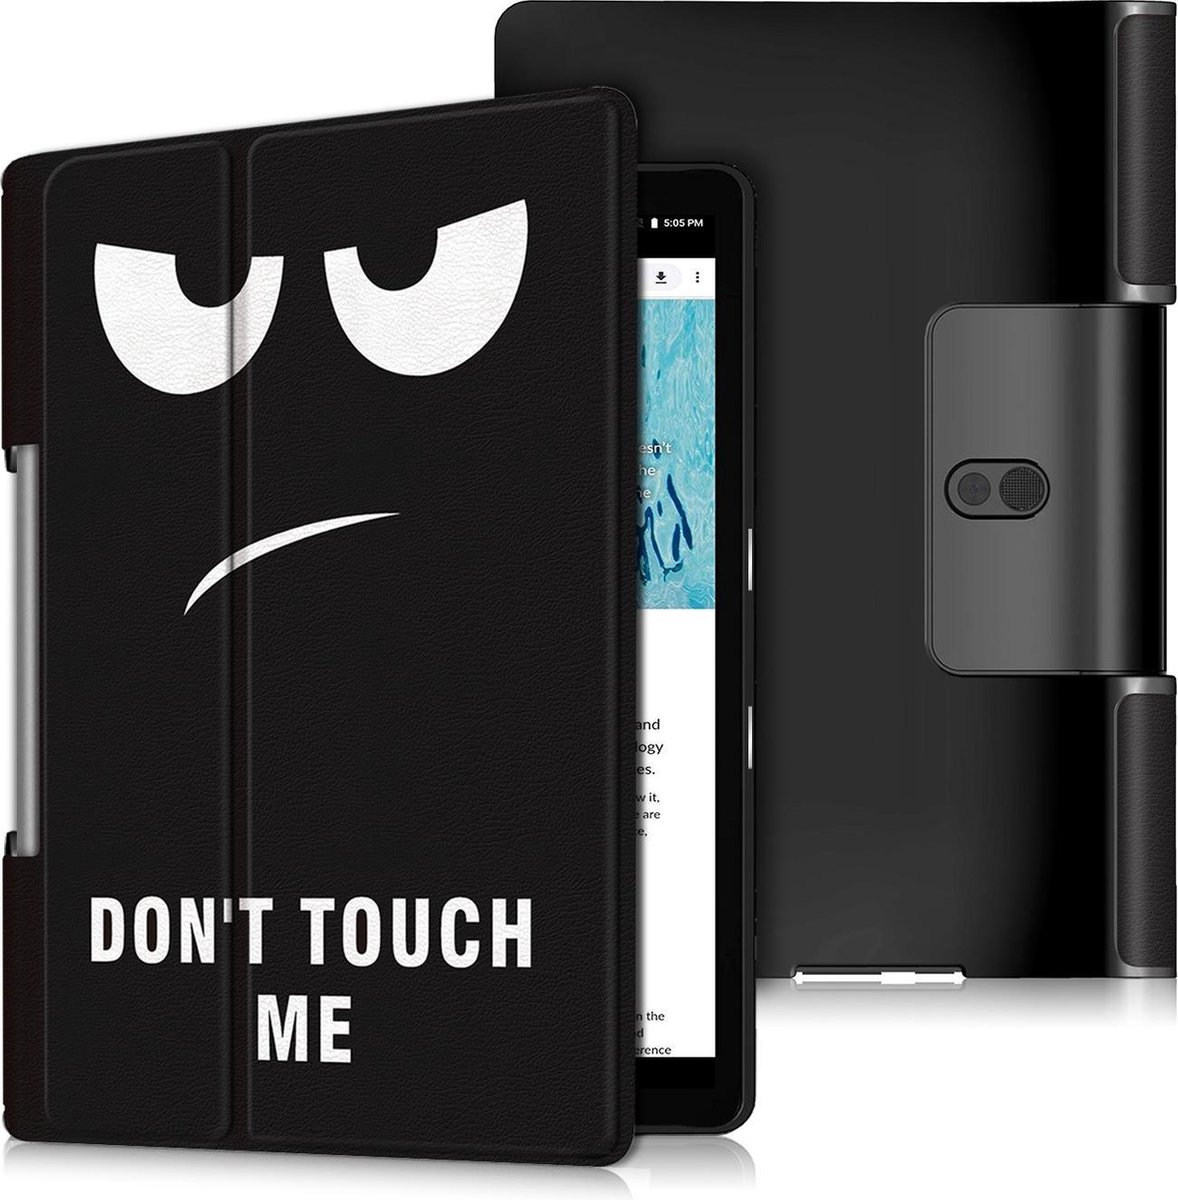 Tablet Hoes geschikt voor Lenovo Yoga Smart Tab 10.1 - Tri-Fold Book Case - Don't Touch Me